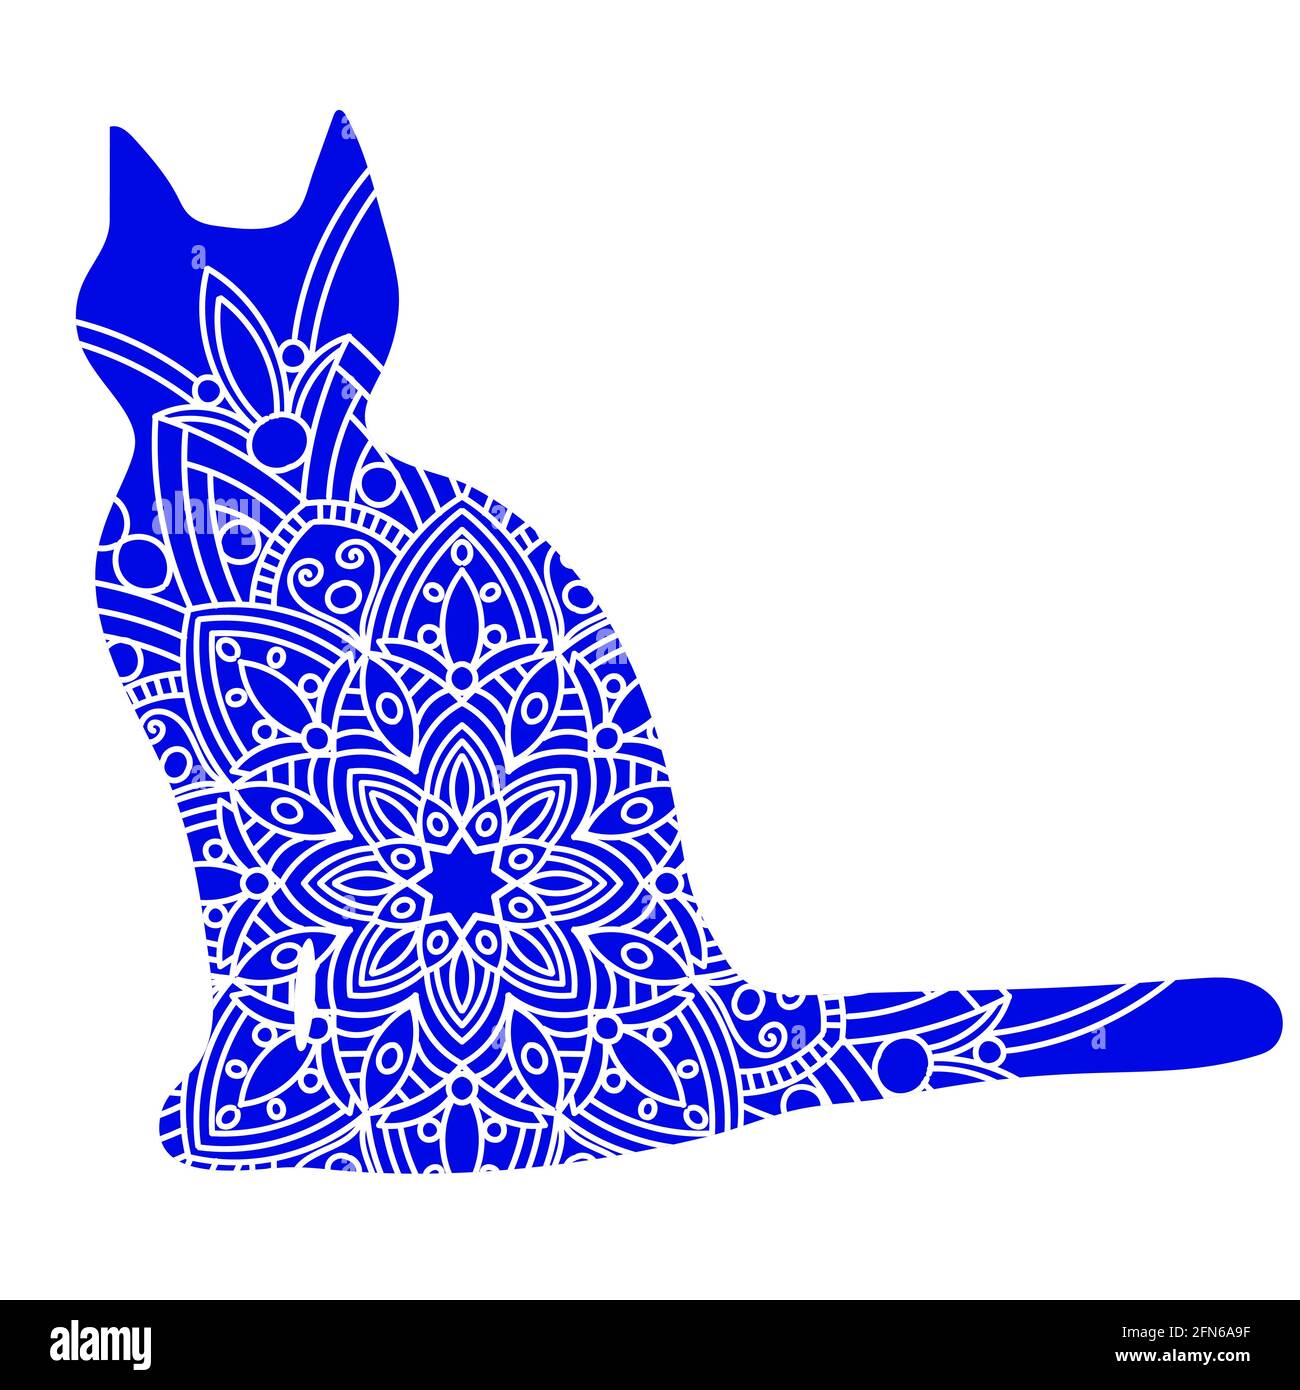 Doodle cat mandala in blue and white for page adult coloring books, animal vector pattern. Antistress design. Stock Vector